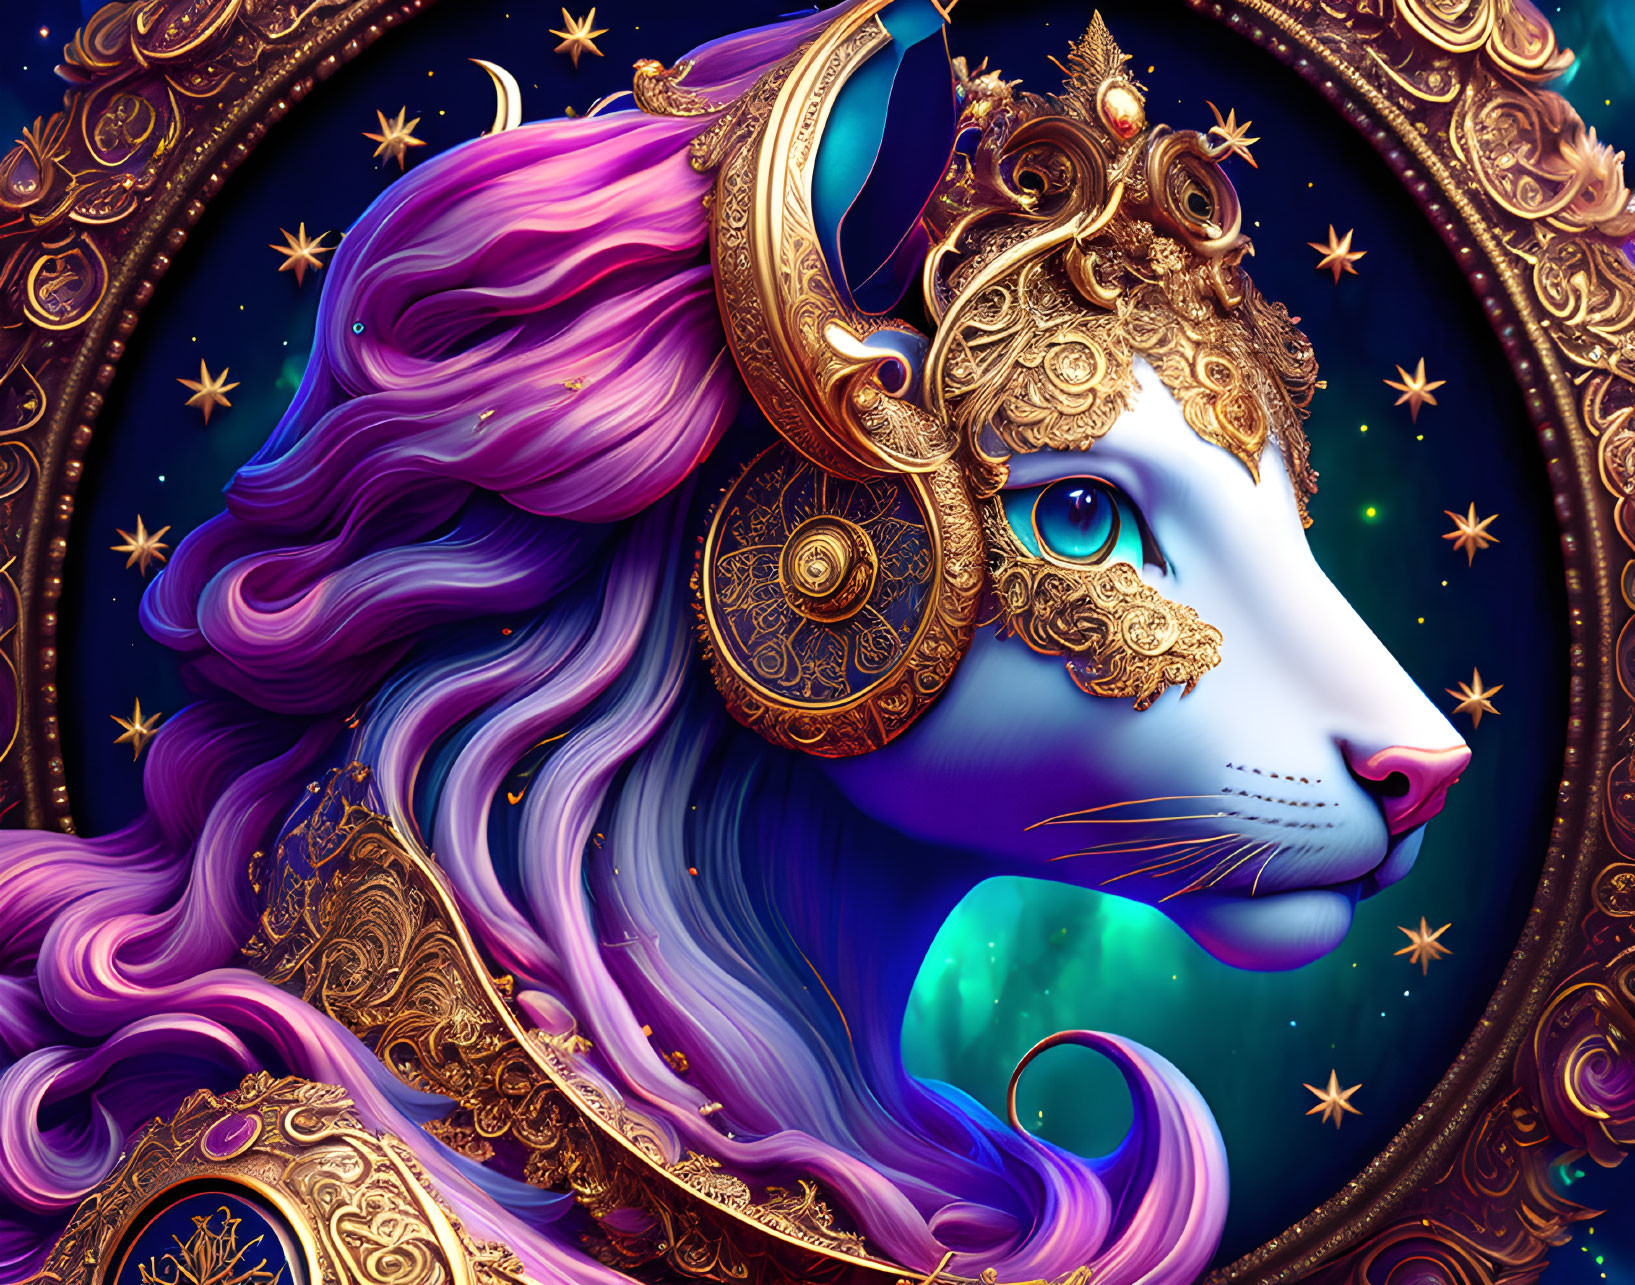 Majestic cat in golden armor with purple hair on cosmic background